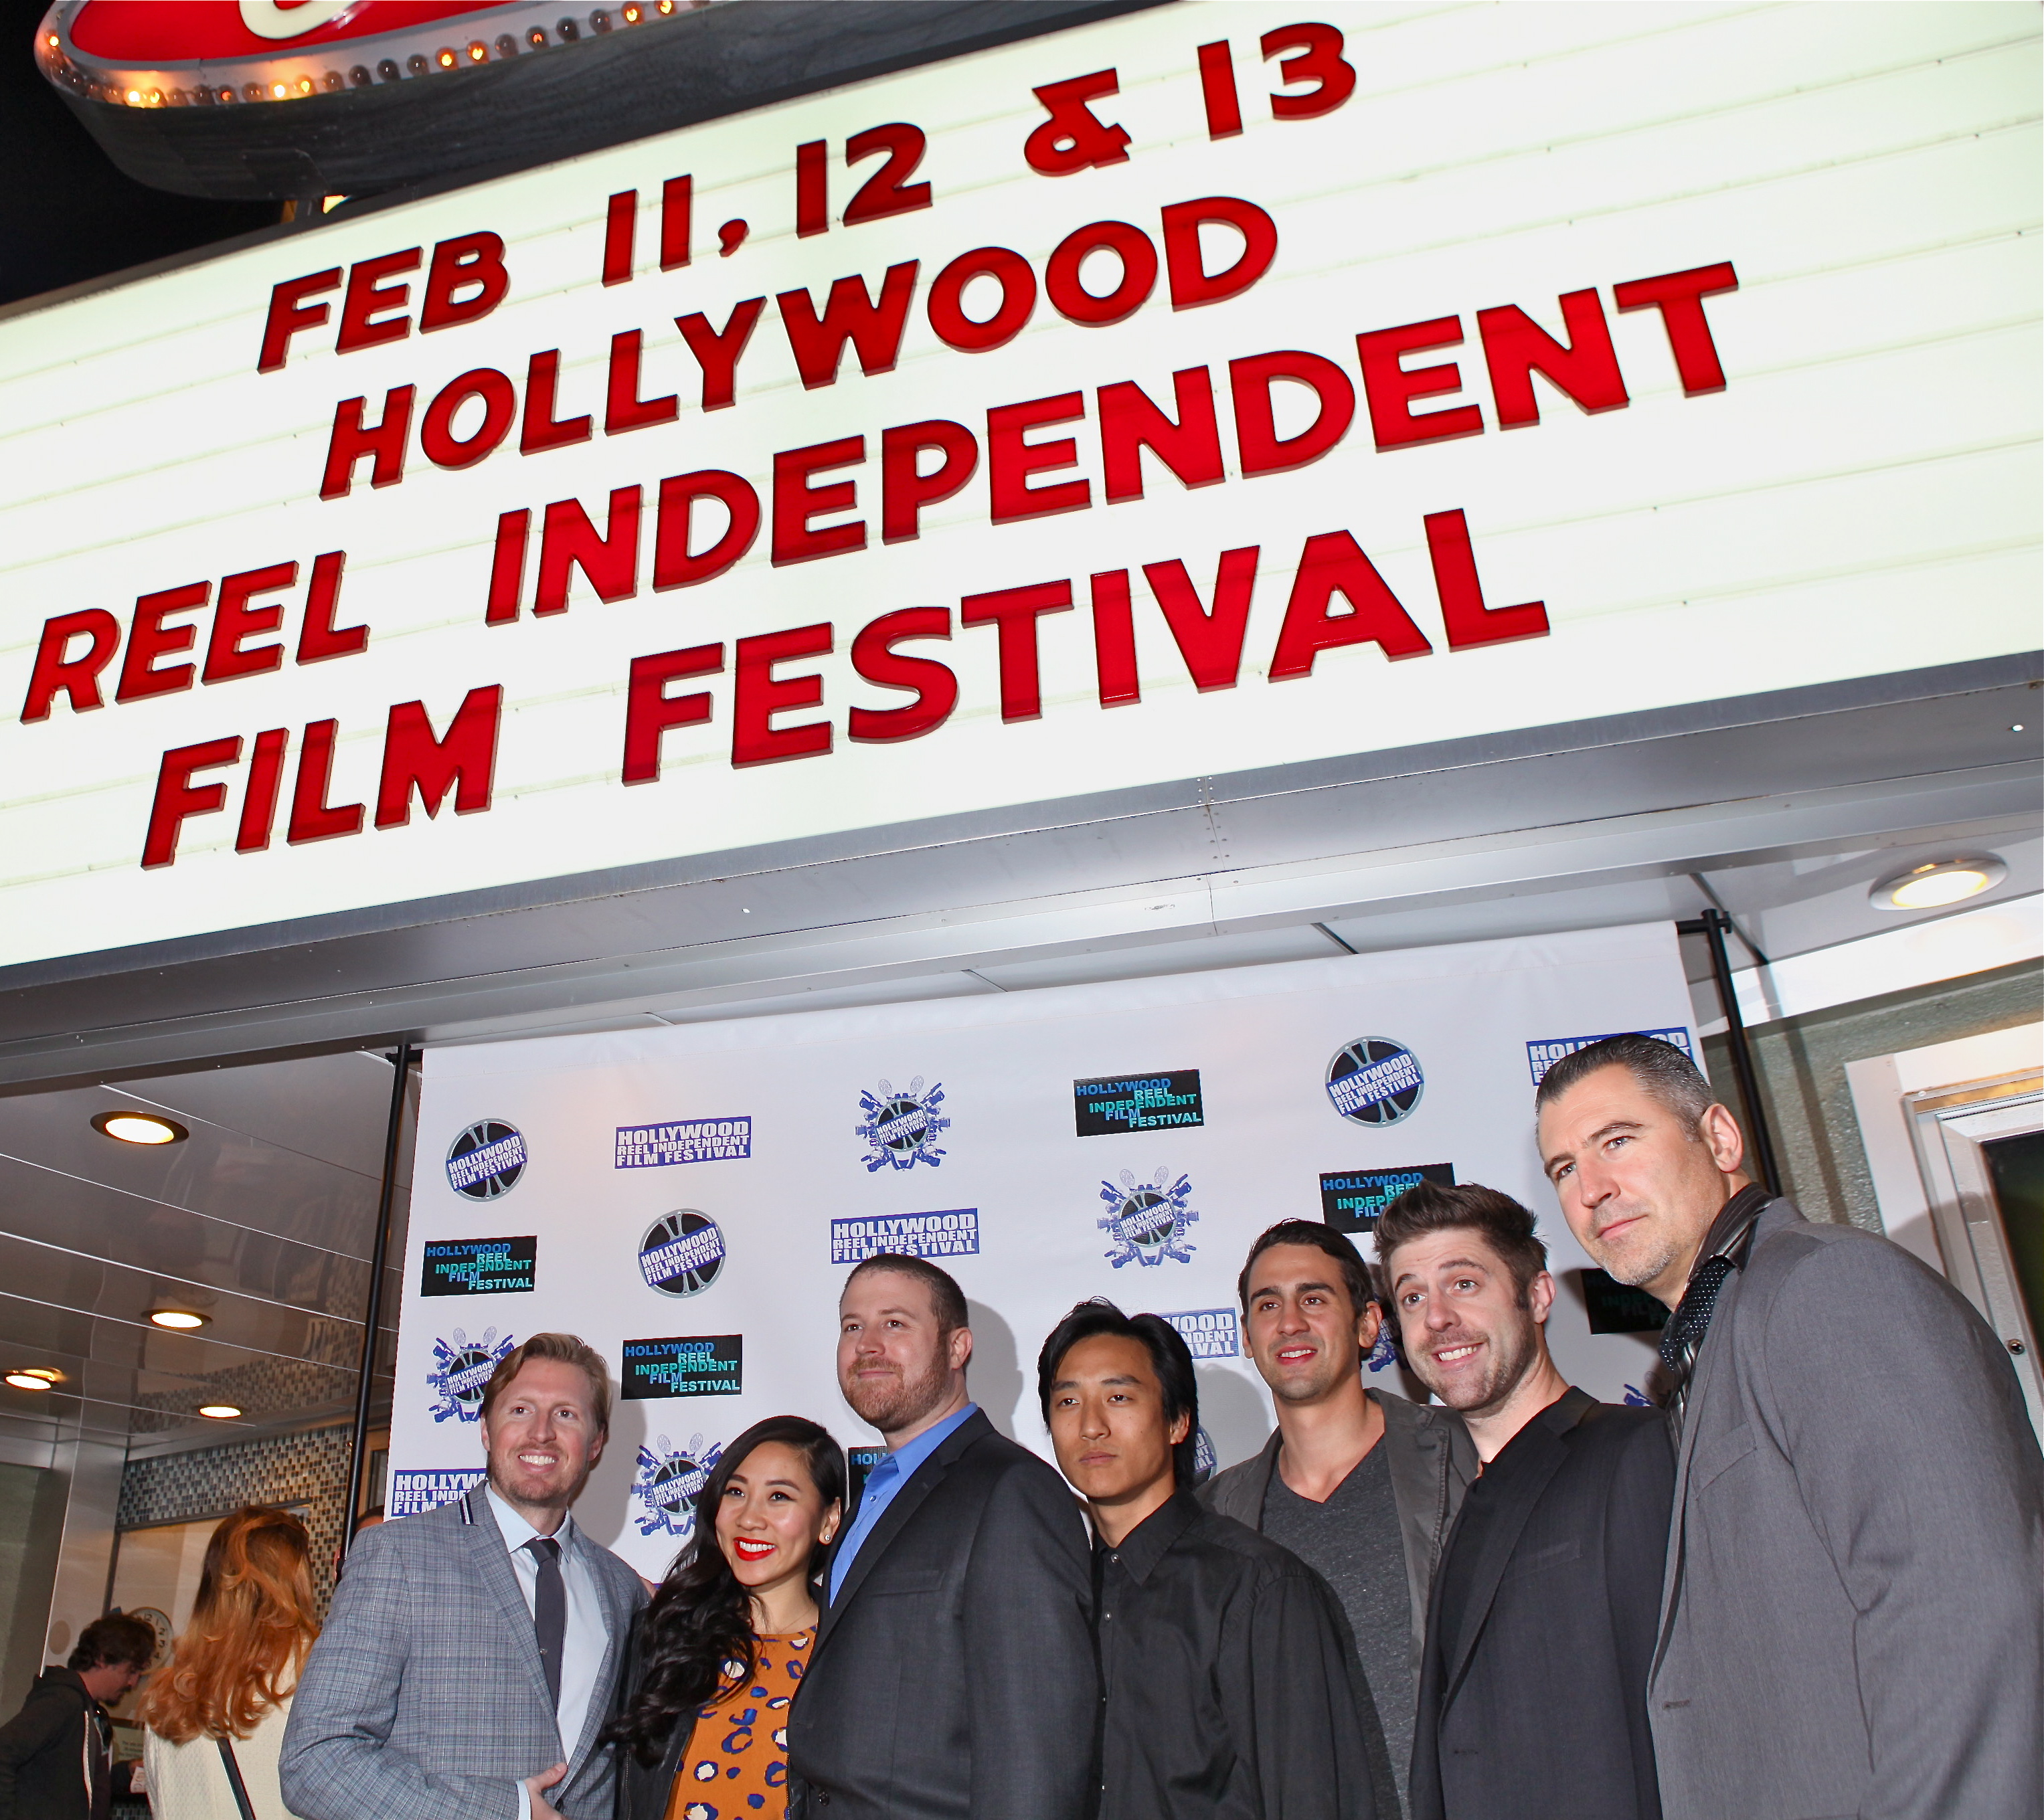 HRIFF 2014 - HELL. A.